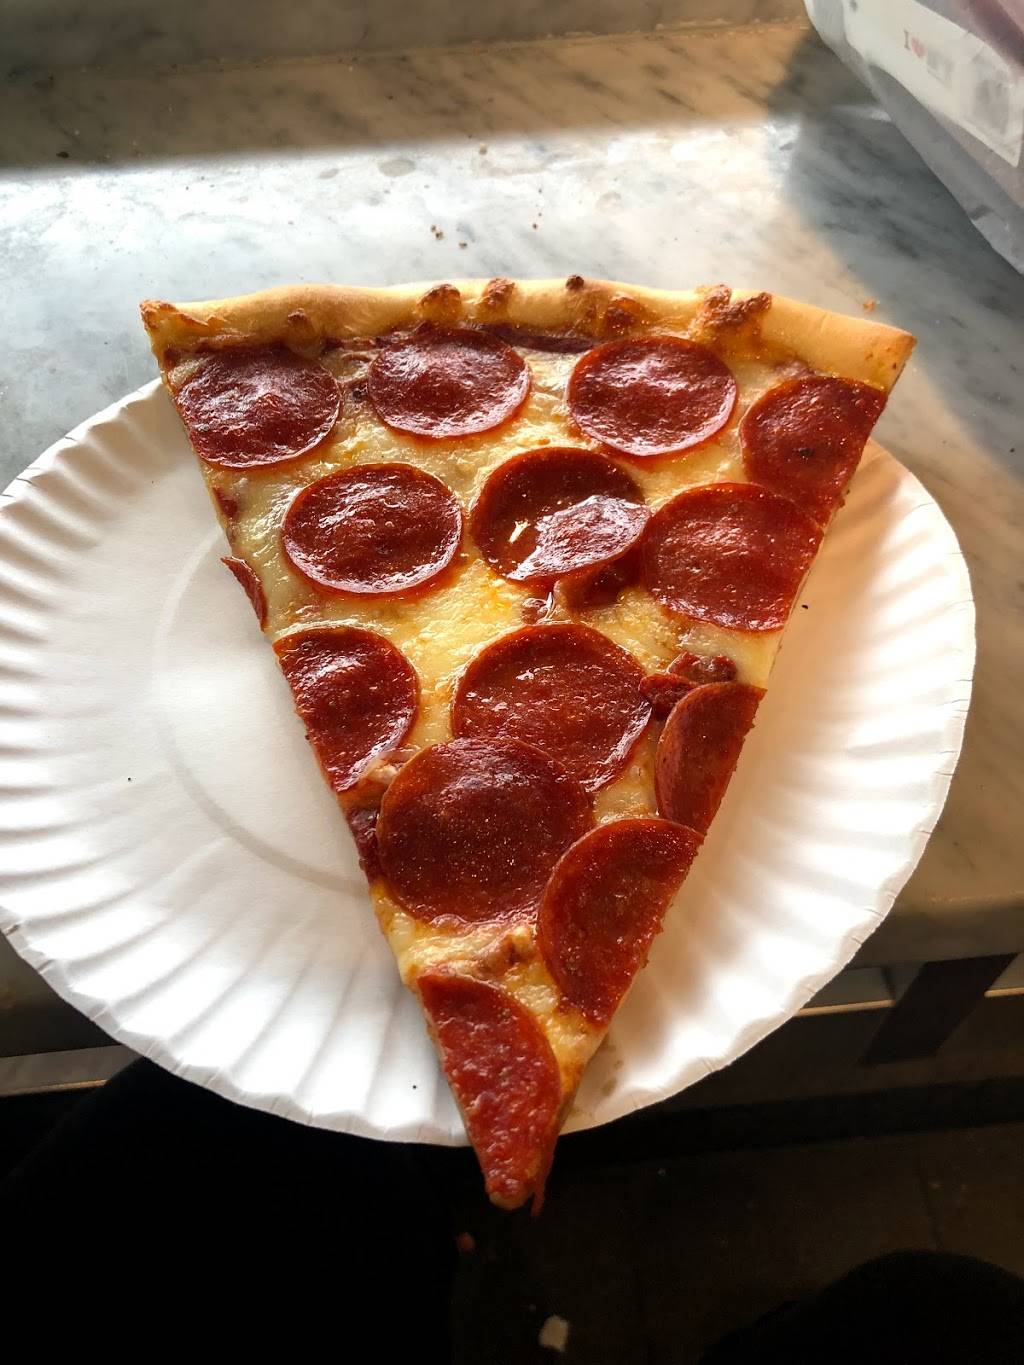 Pizza Plus | restaurant | 4 South St, New York, NY 10004, USA | 2129431800 OR +1 212-943-1800